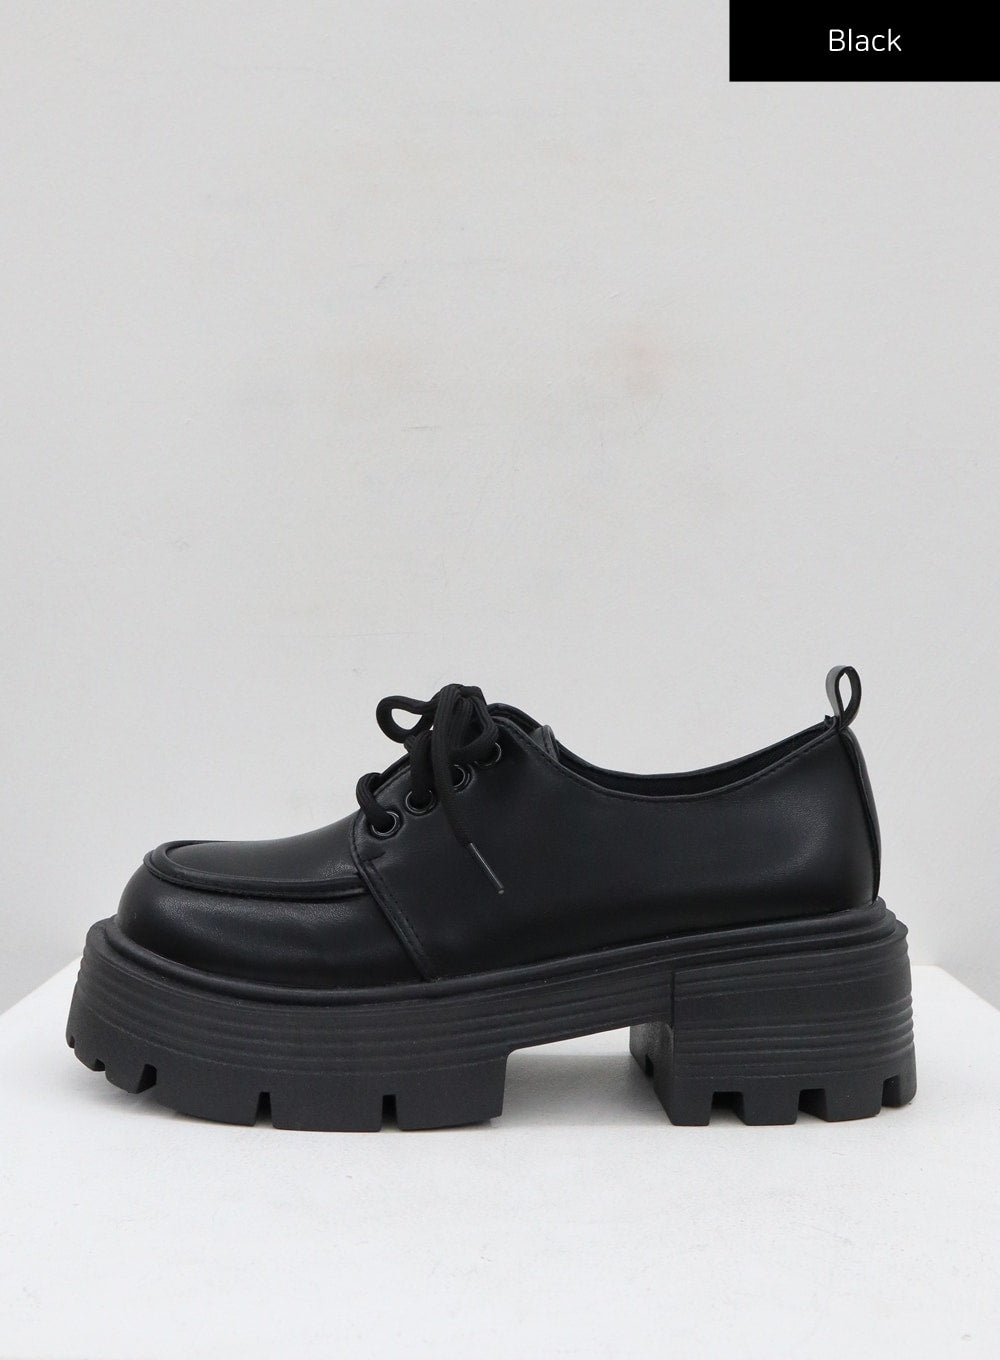 Thick Platform Lace-Up Loafer Shoes CN17